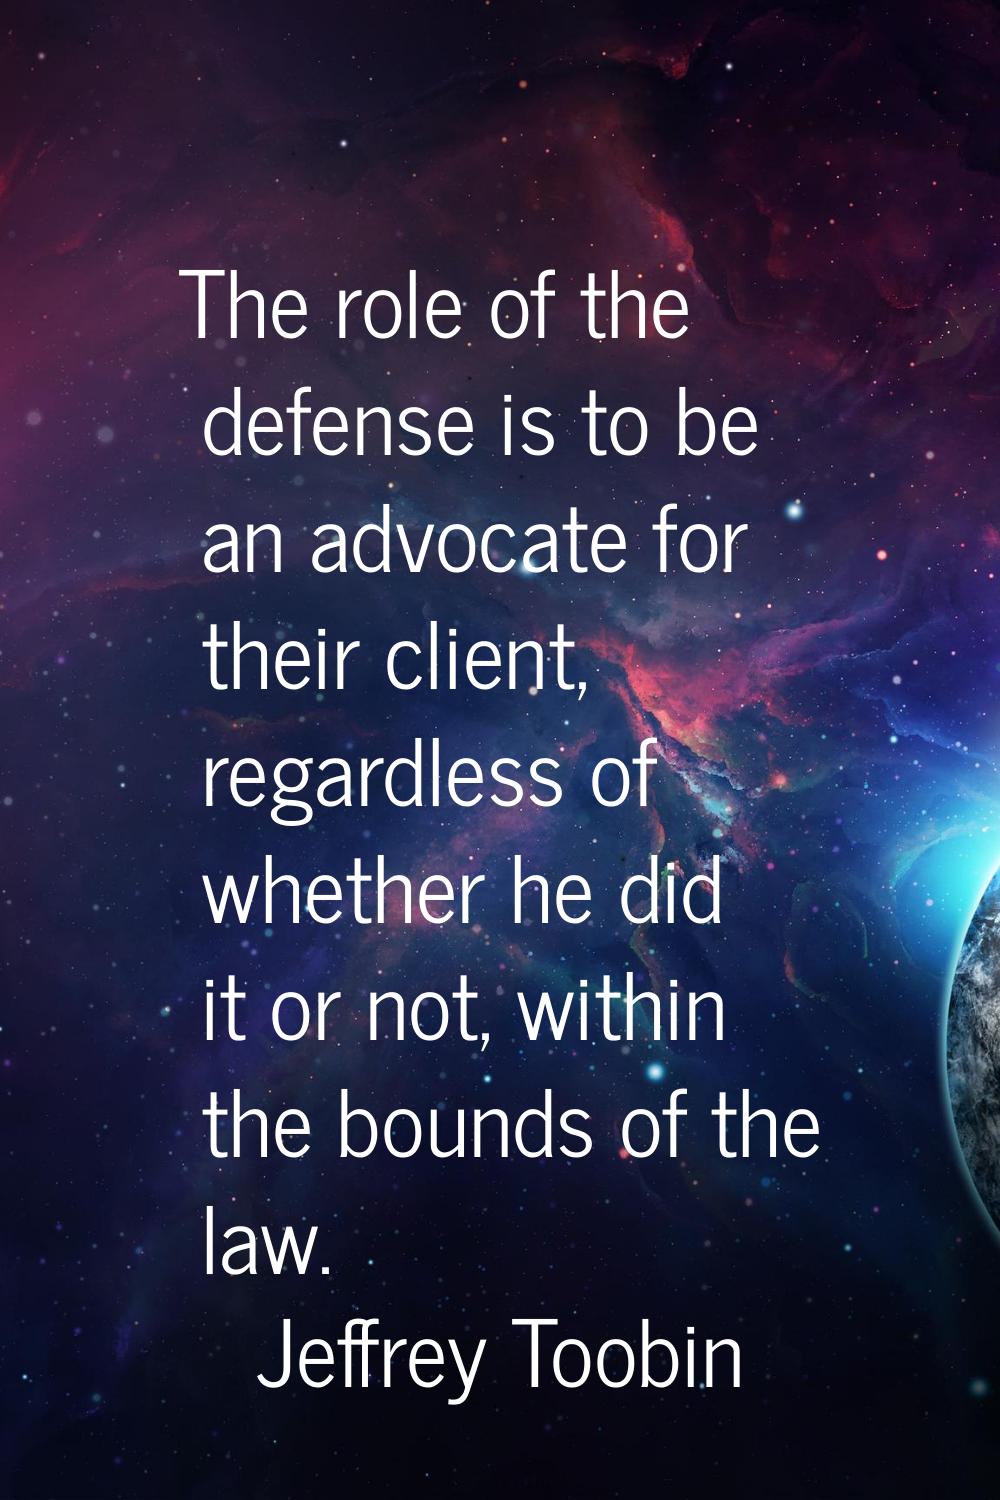 The role of the defense is to be an advocate for their client, regardless of whether he did it or n